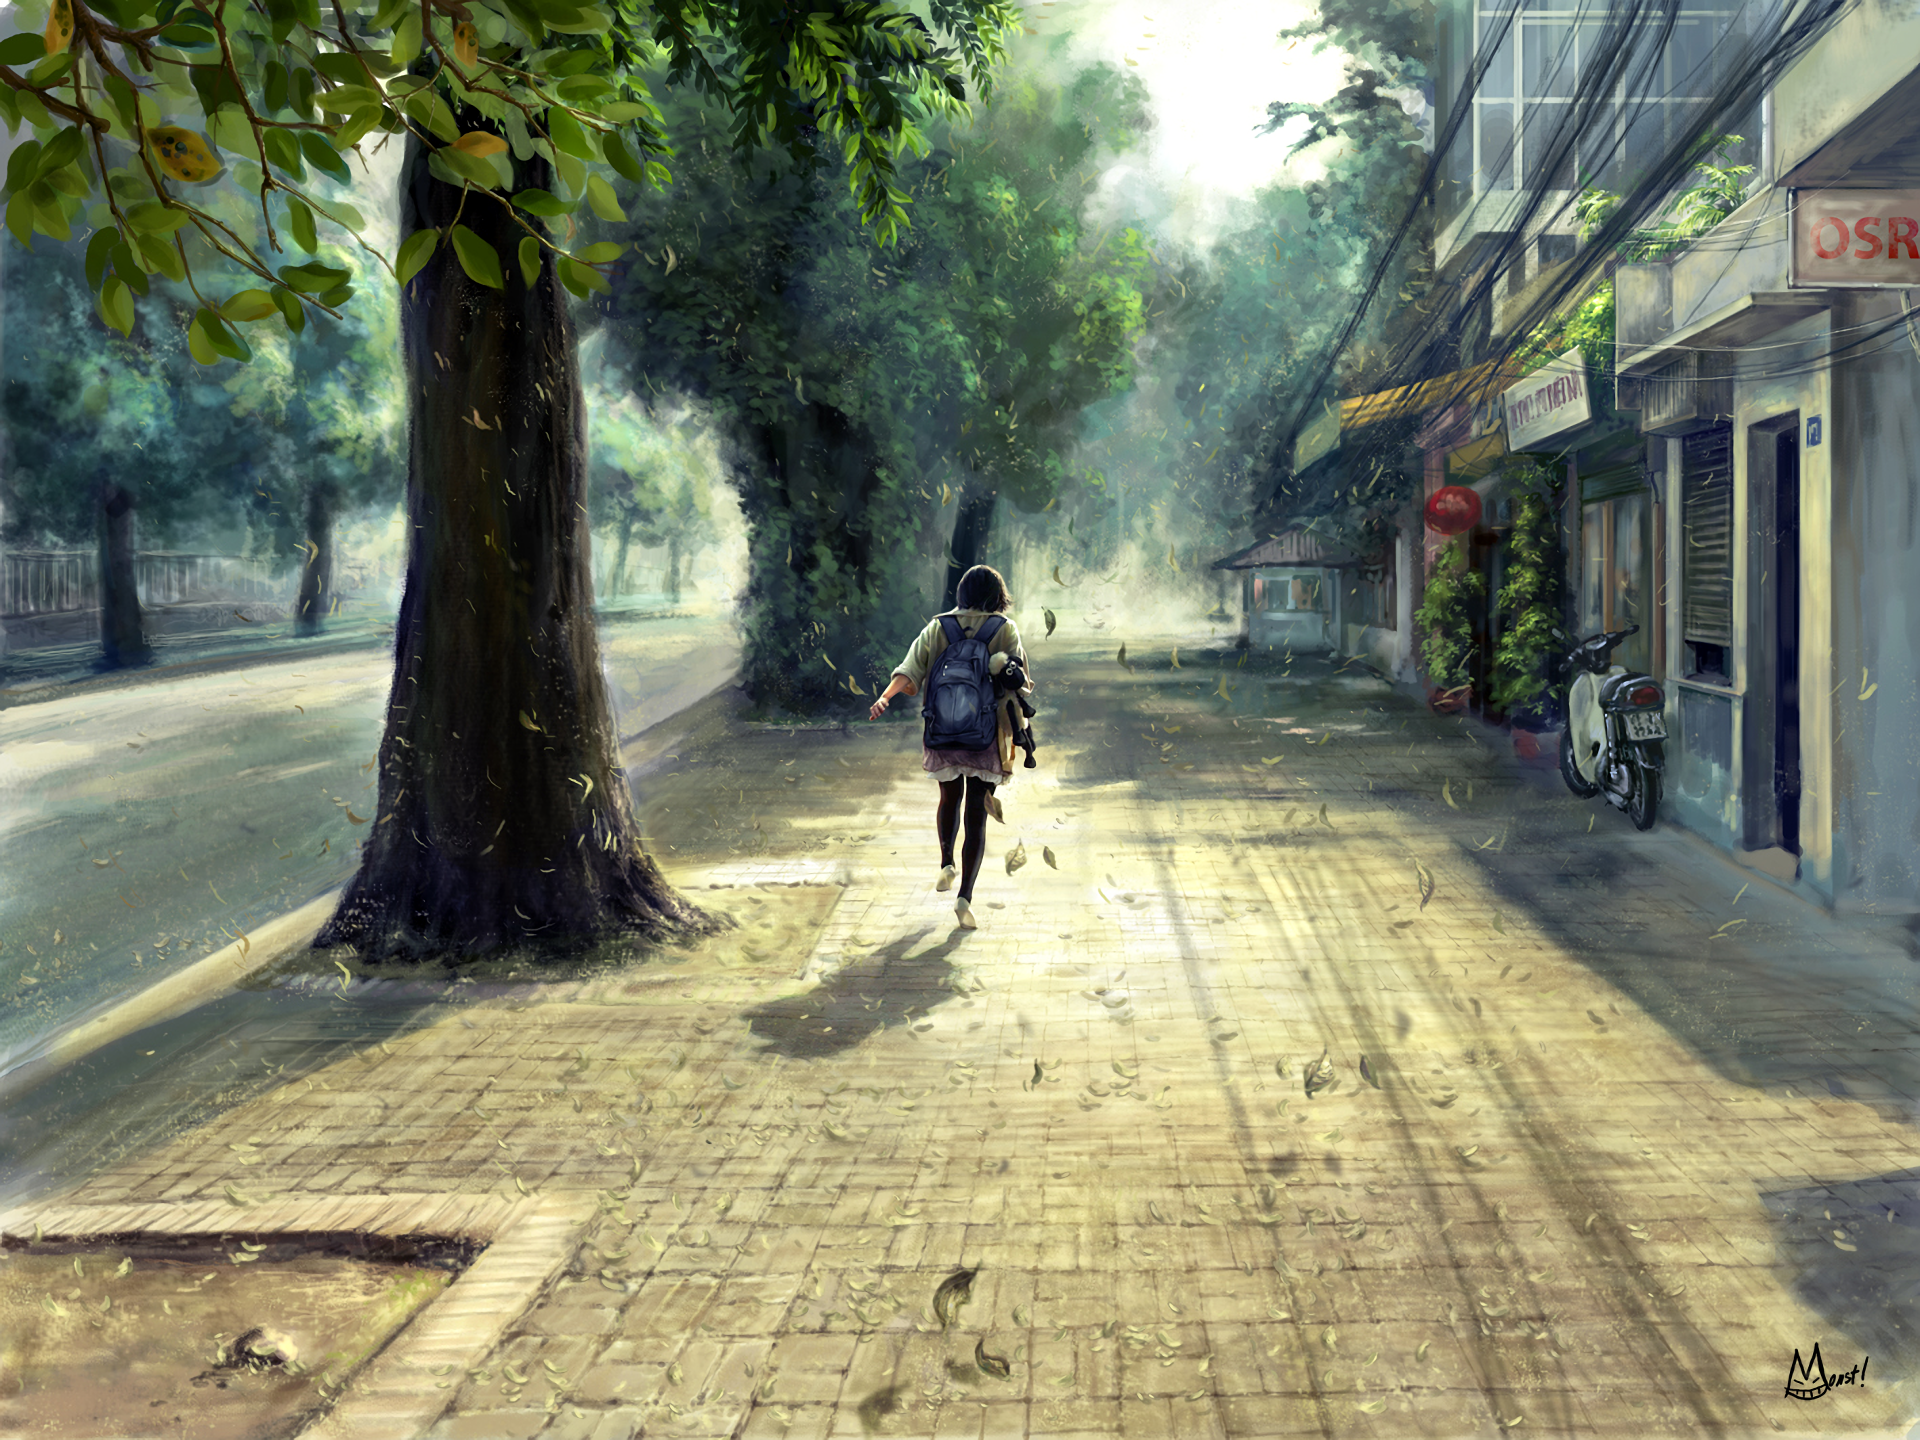 A runner embracing the wind, passing through empty streets with a backpack, amidst trees.